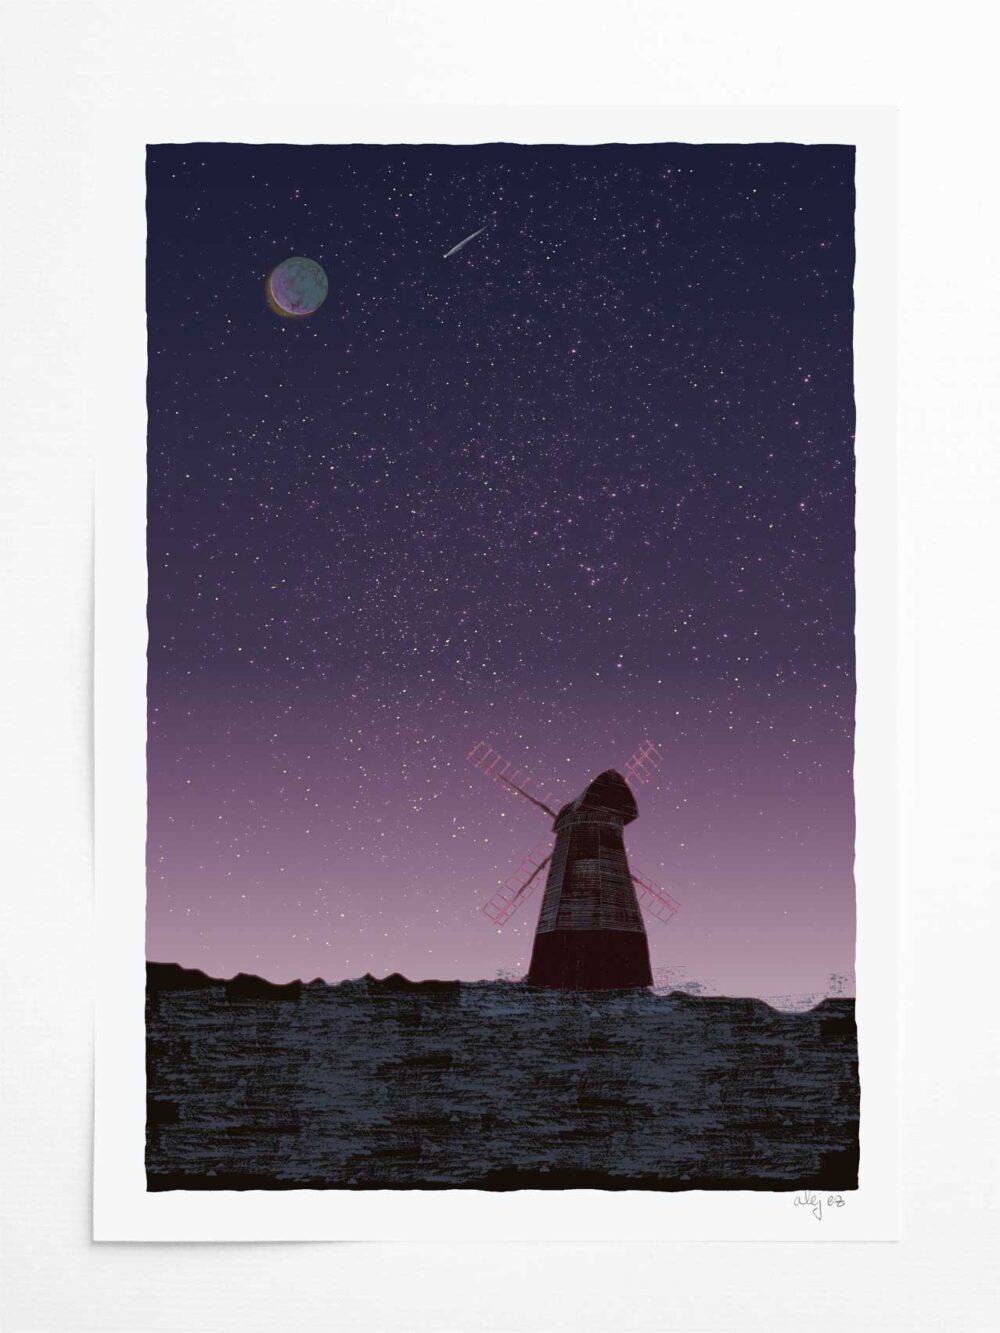 art print by artist alej ez titled A Starry Night the Moon and Rottingdean Beacon Mill